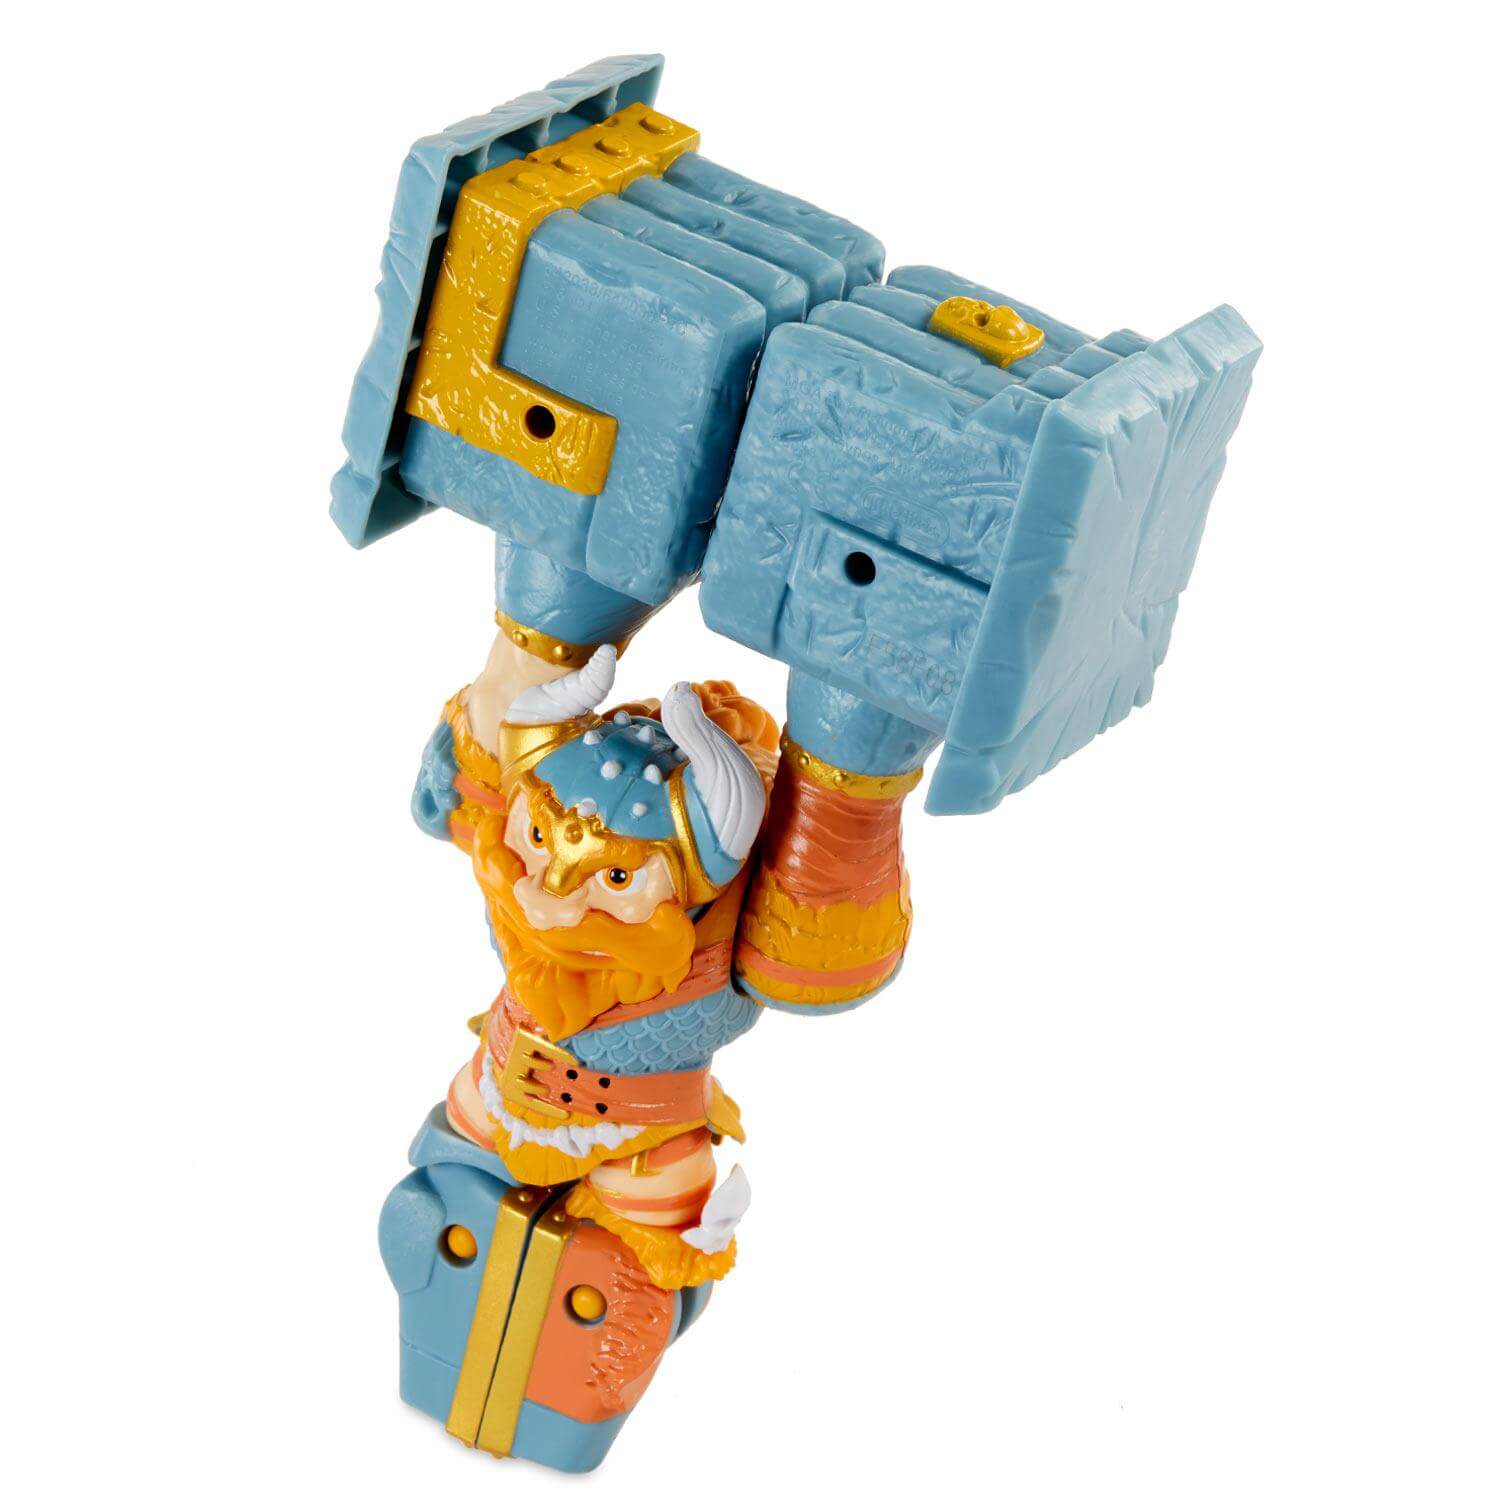 Front view of the sledge hammerfist figure.